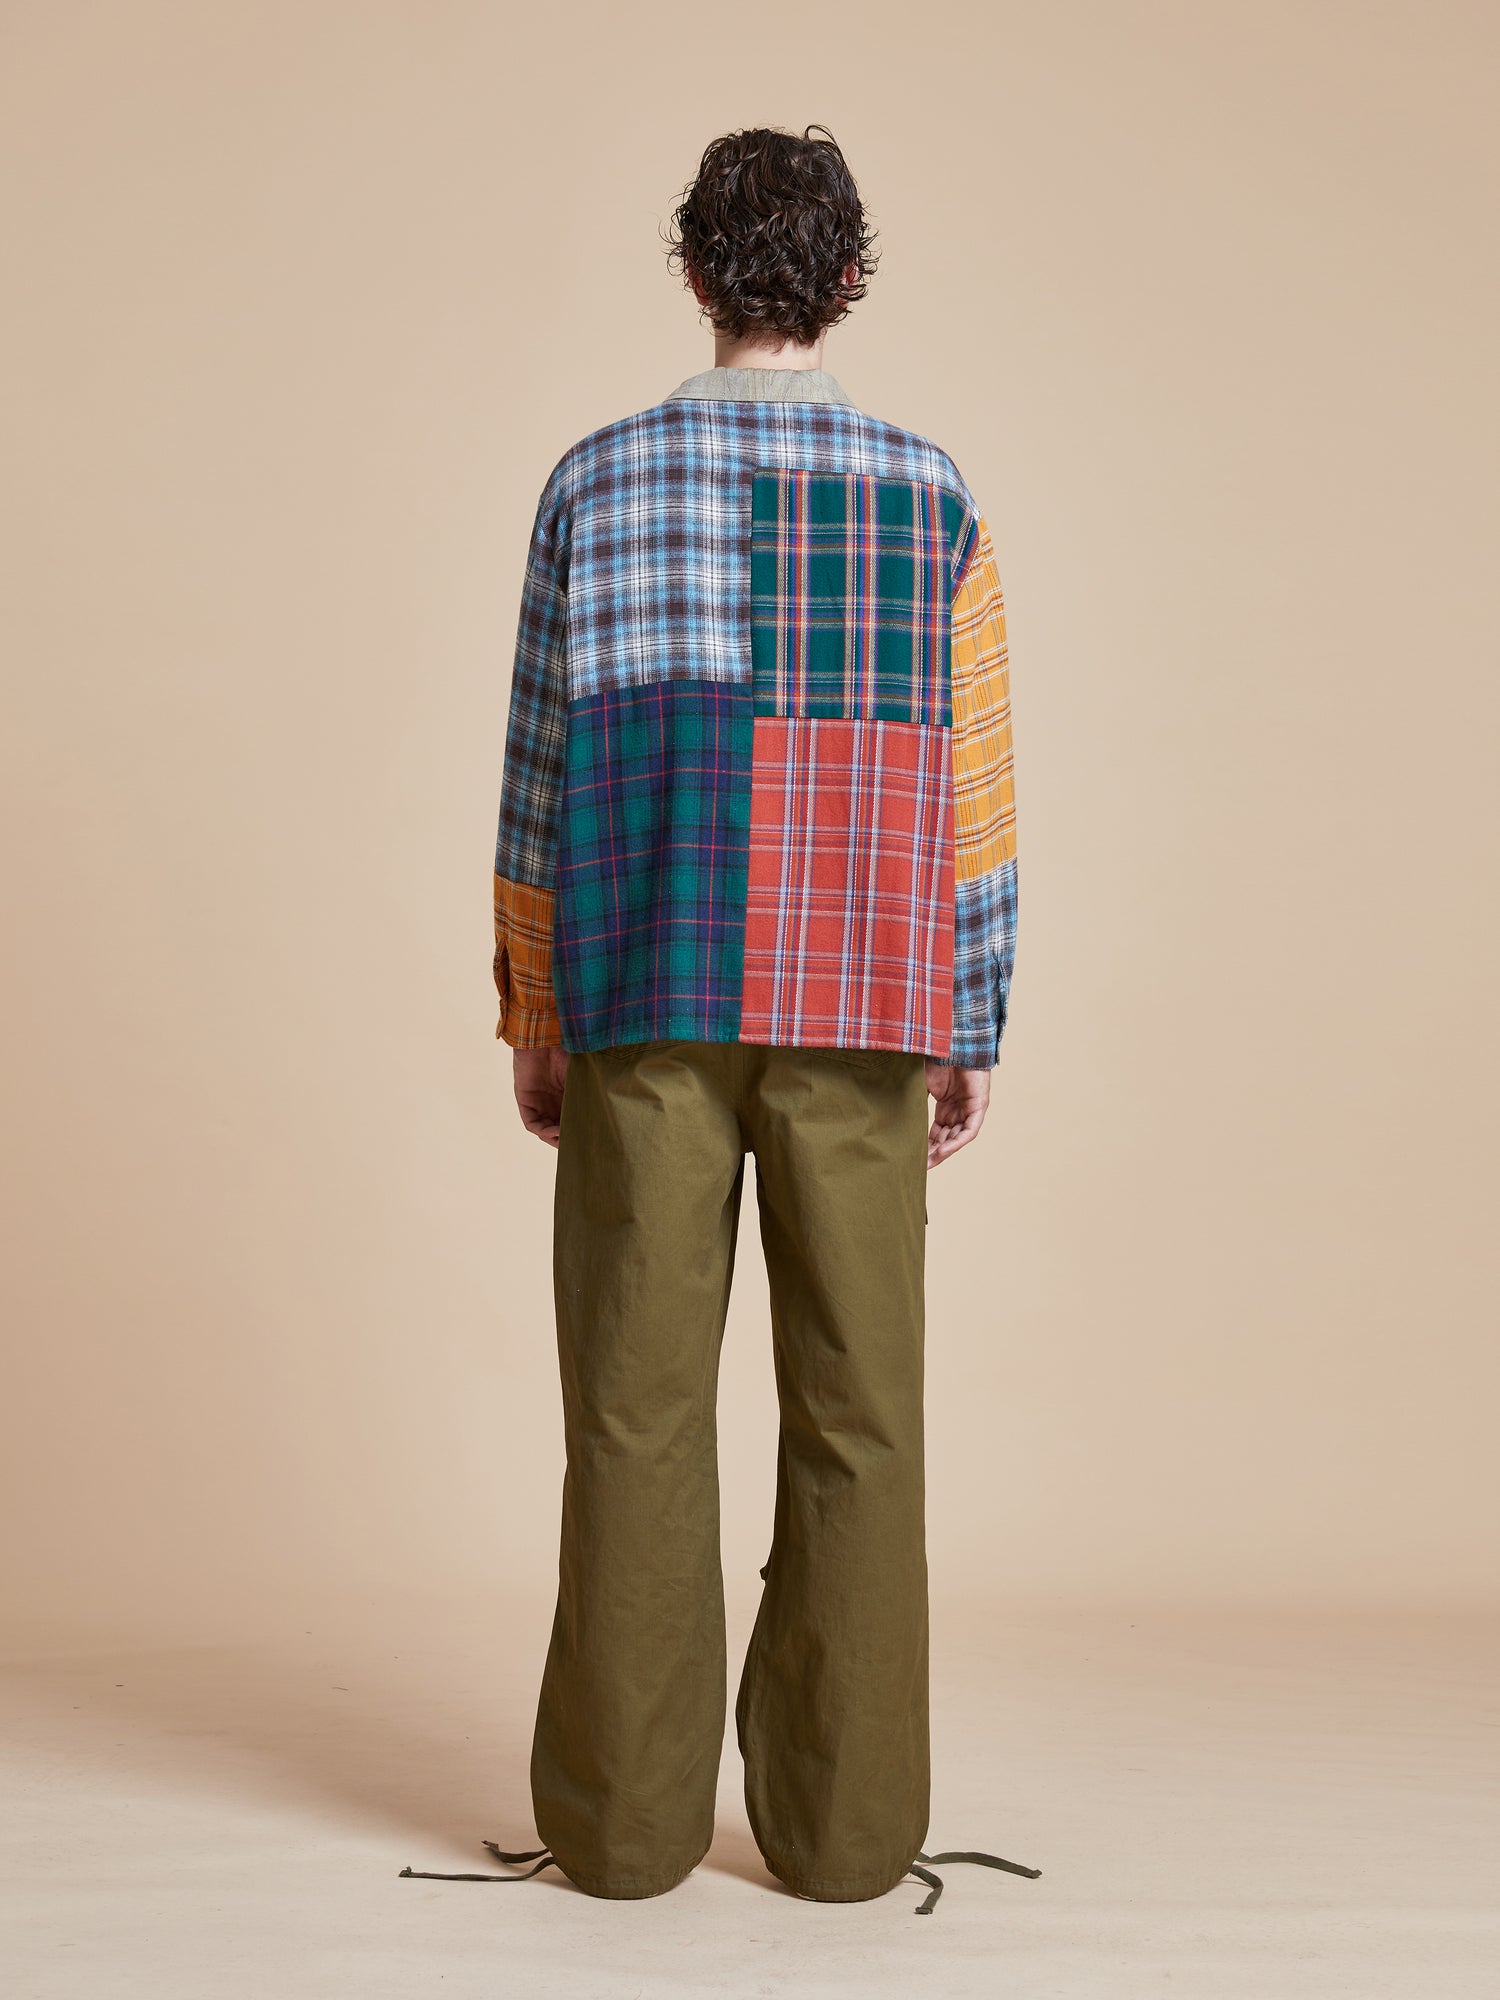 The back view of a man wearing a Found Multi Plaid Tartan Shirt and pants.